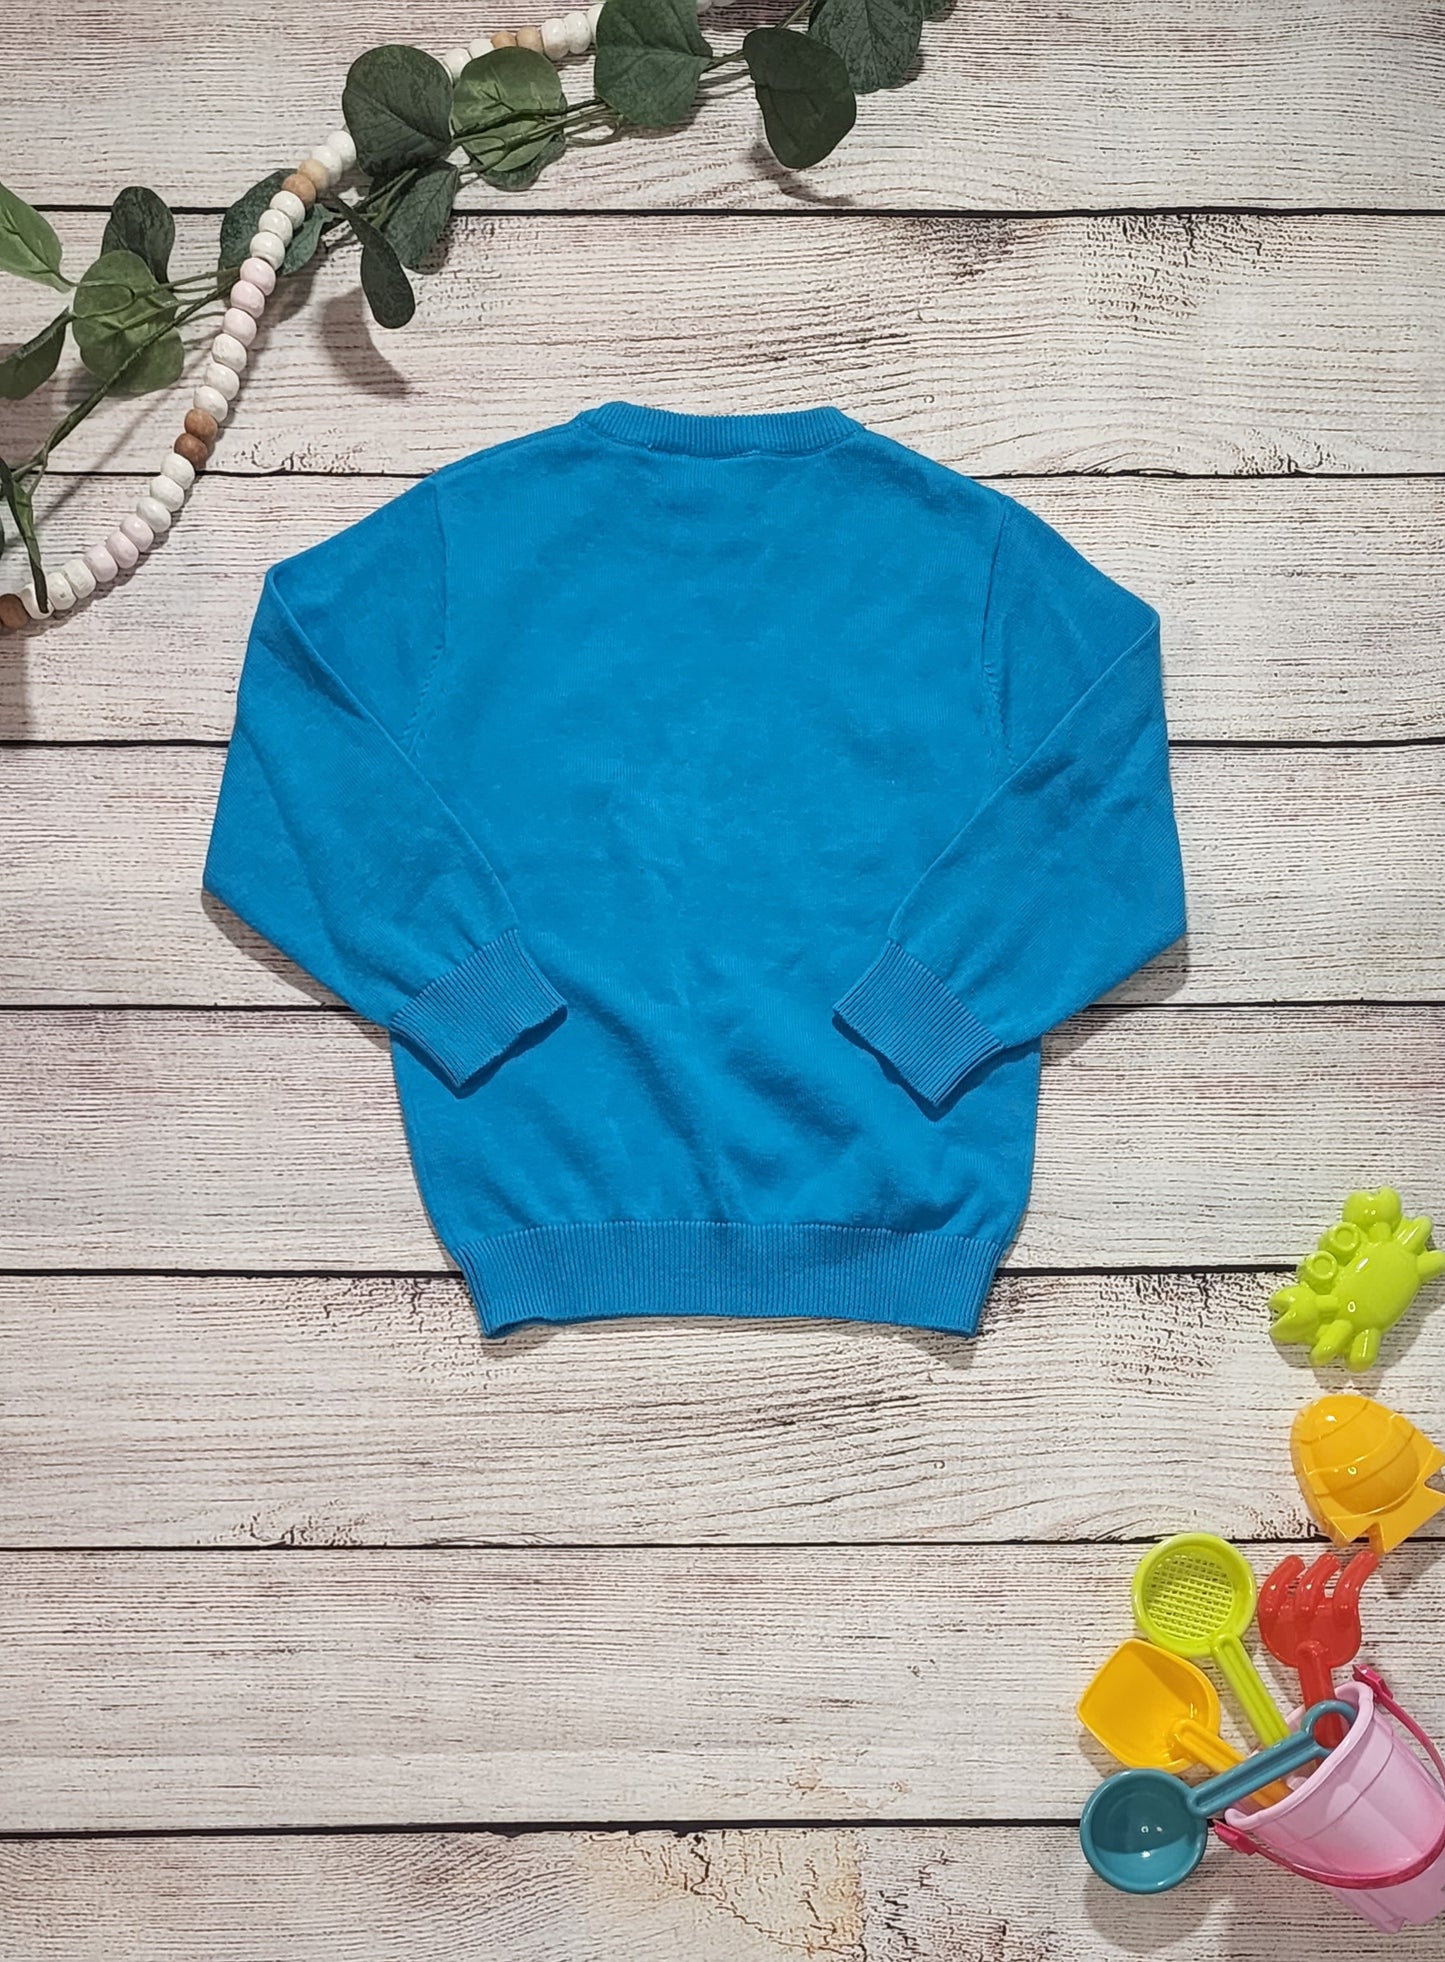 Place Sweater, Size 4T